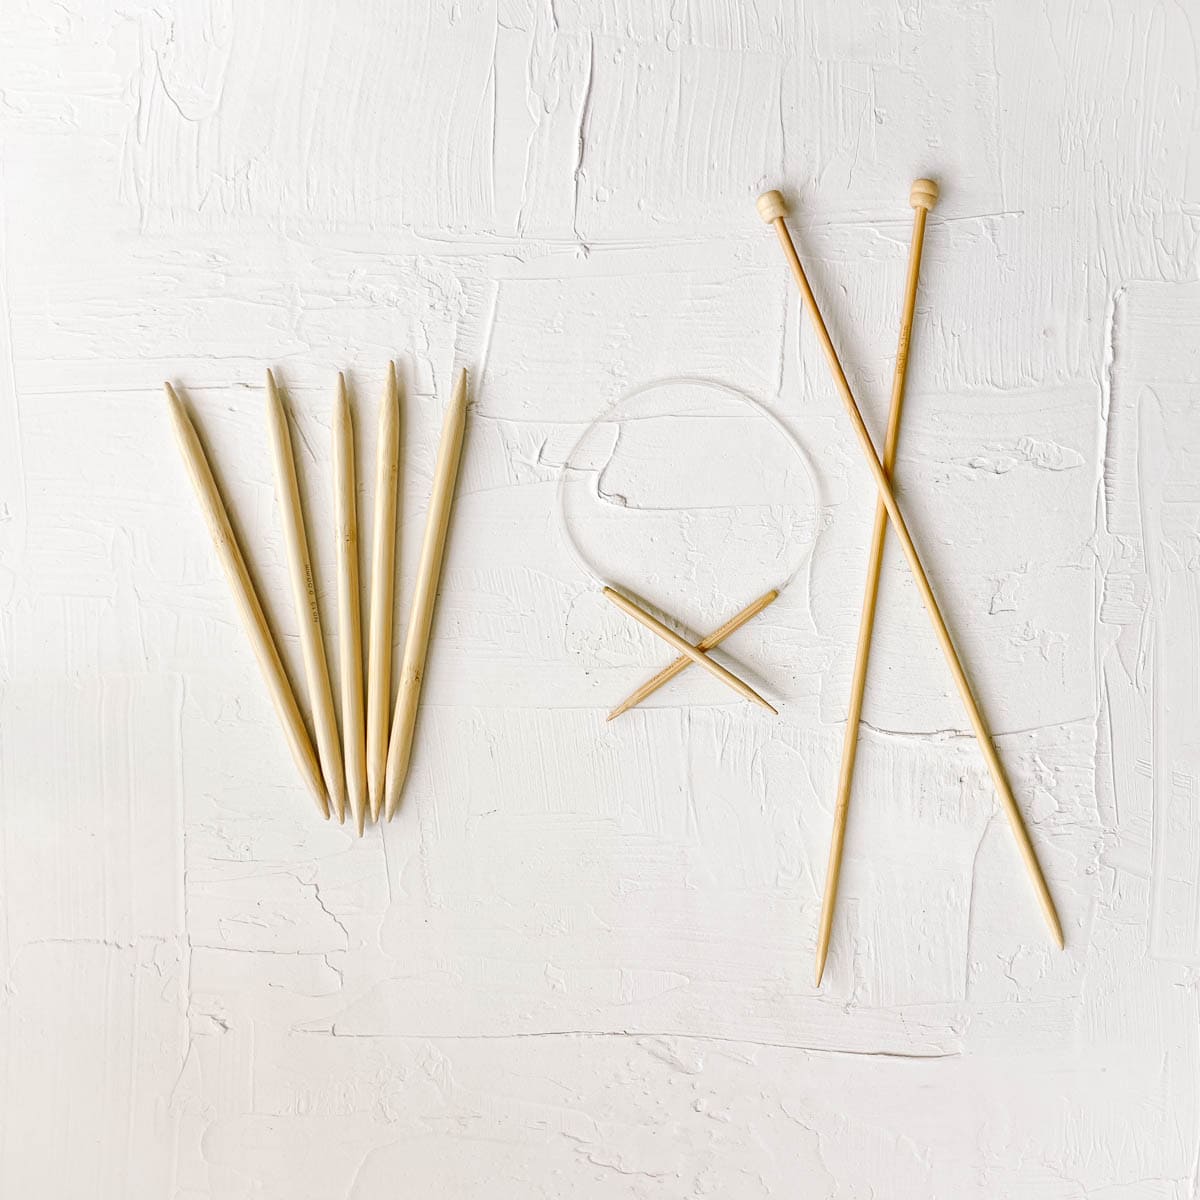 Bamboo double pointed knitting needles, circular needles and straight needles.